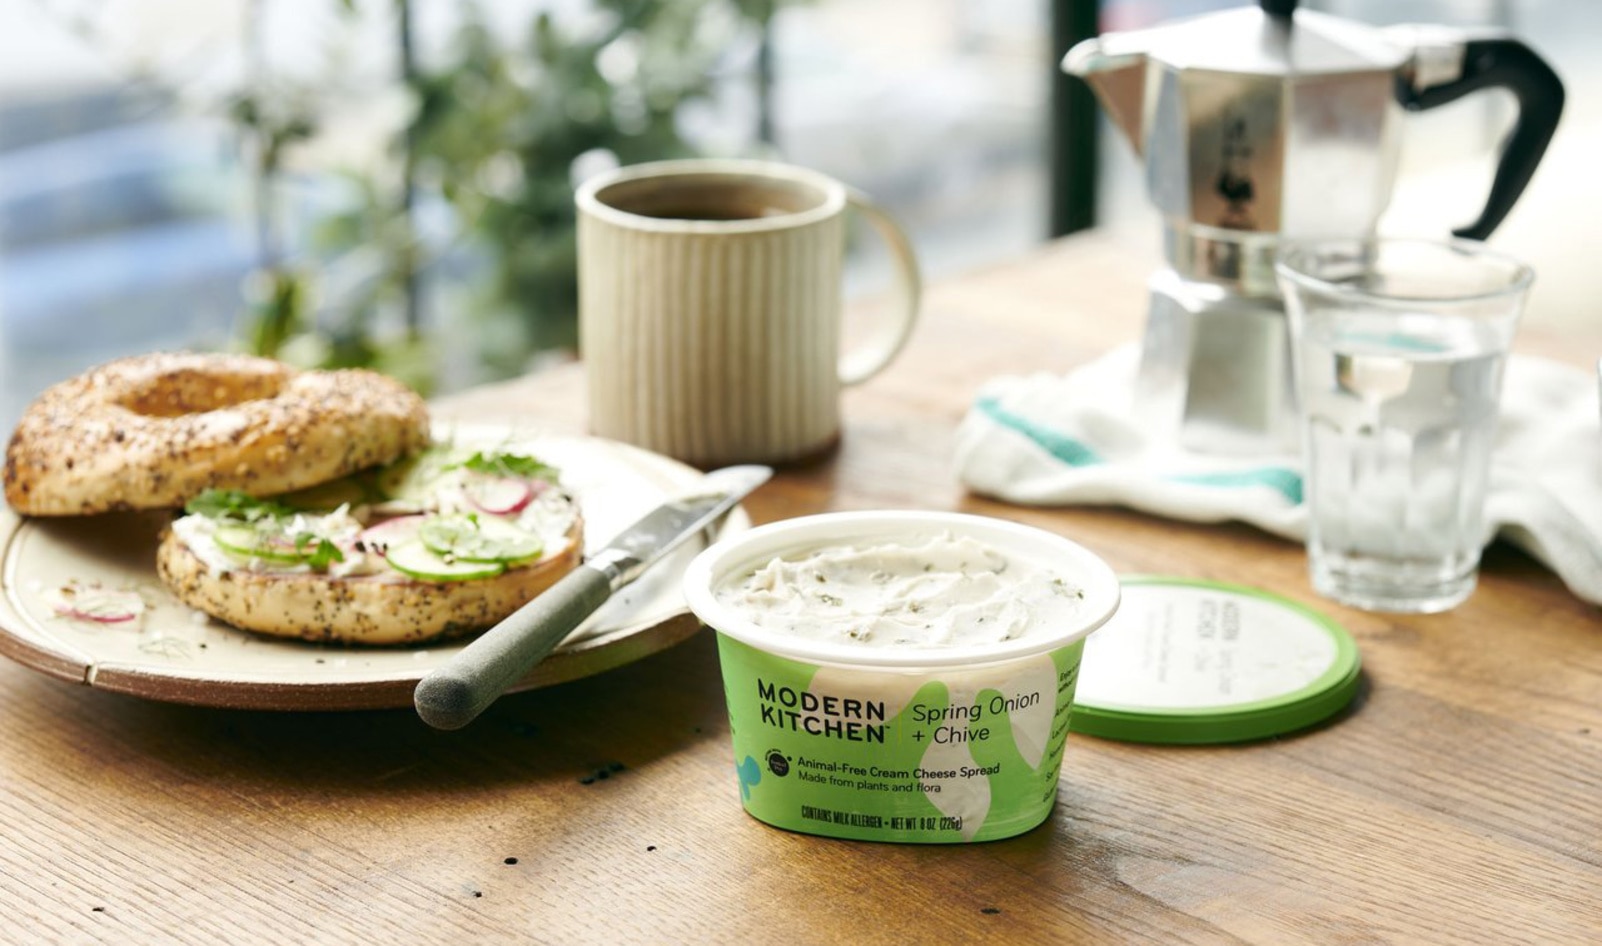 Perfect Day Raises $350 Million Ahead of IPO, Announces Dairy-Identical Cheese Label